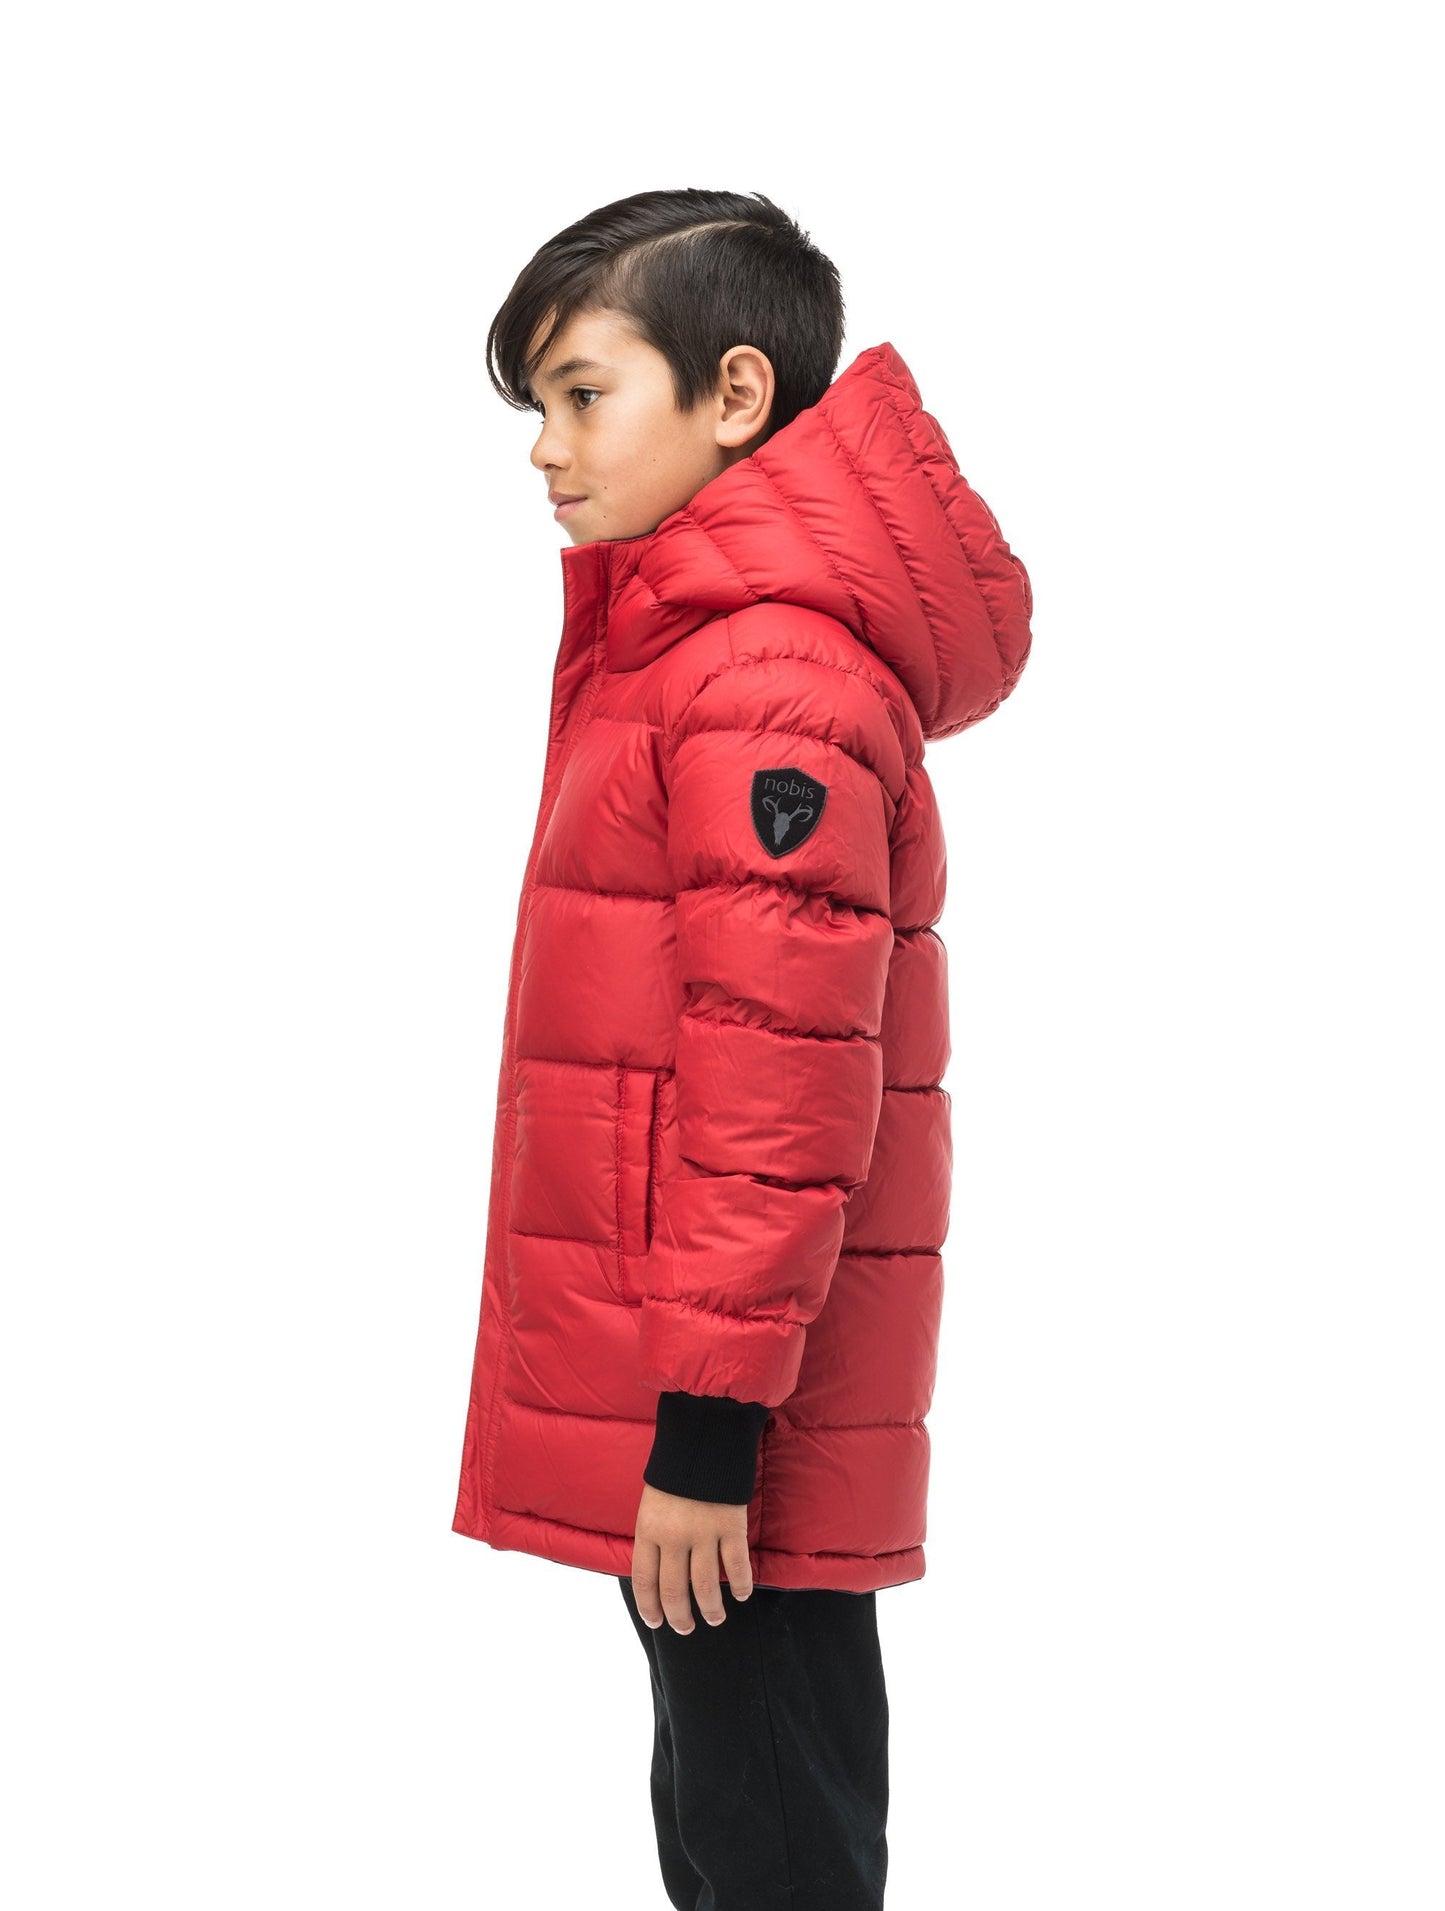 Kids' reversible knee length, down filled parka with waterproof finish in Navy Camo/Vermillion